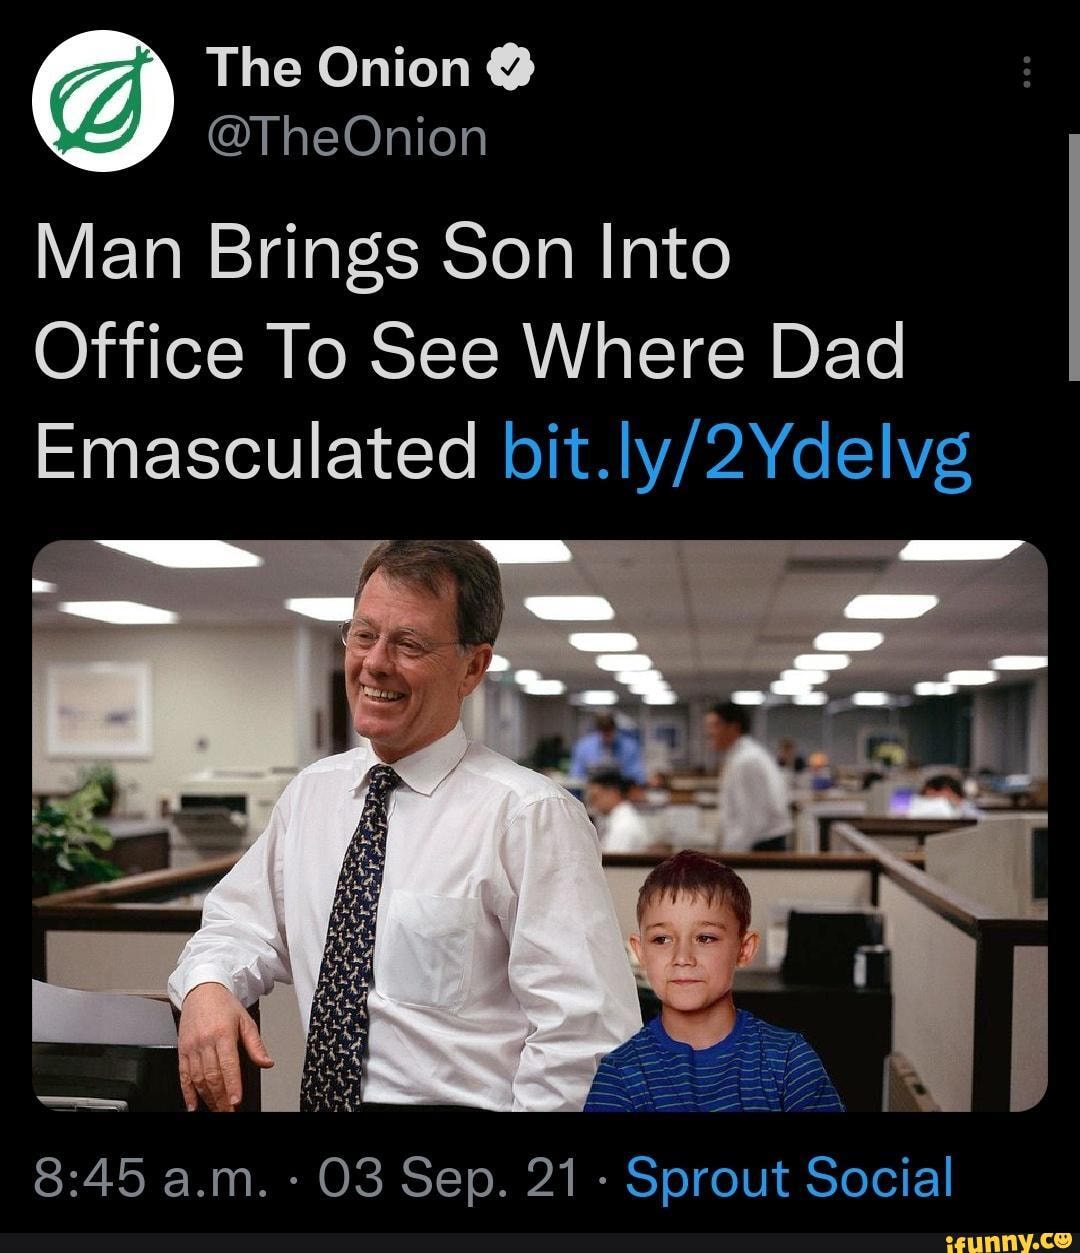 The Onion Theonion Man Brings Son Into Office To See Where Dad Emasculated A M 03 Sep 21 Sprout Social